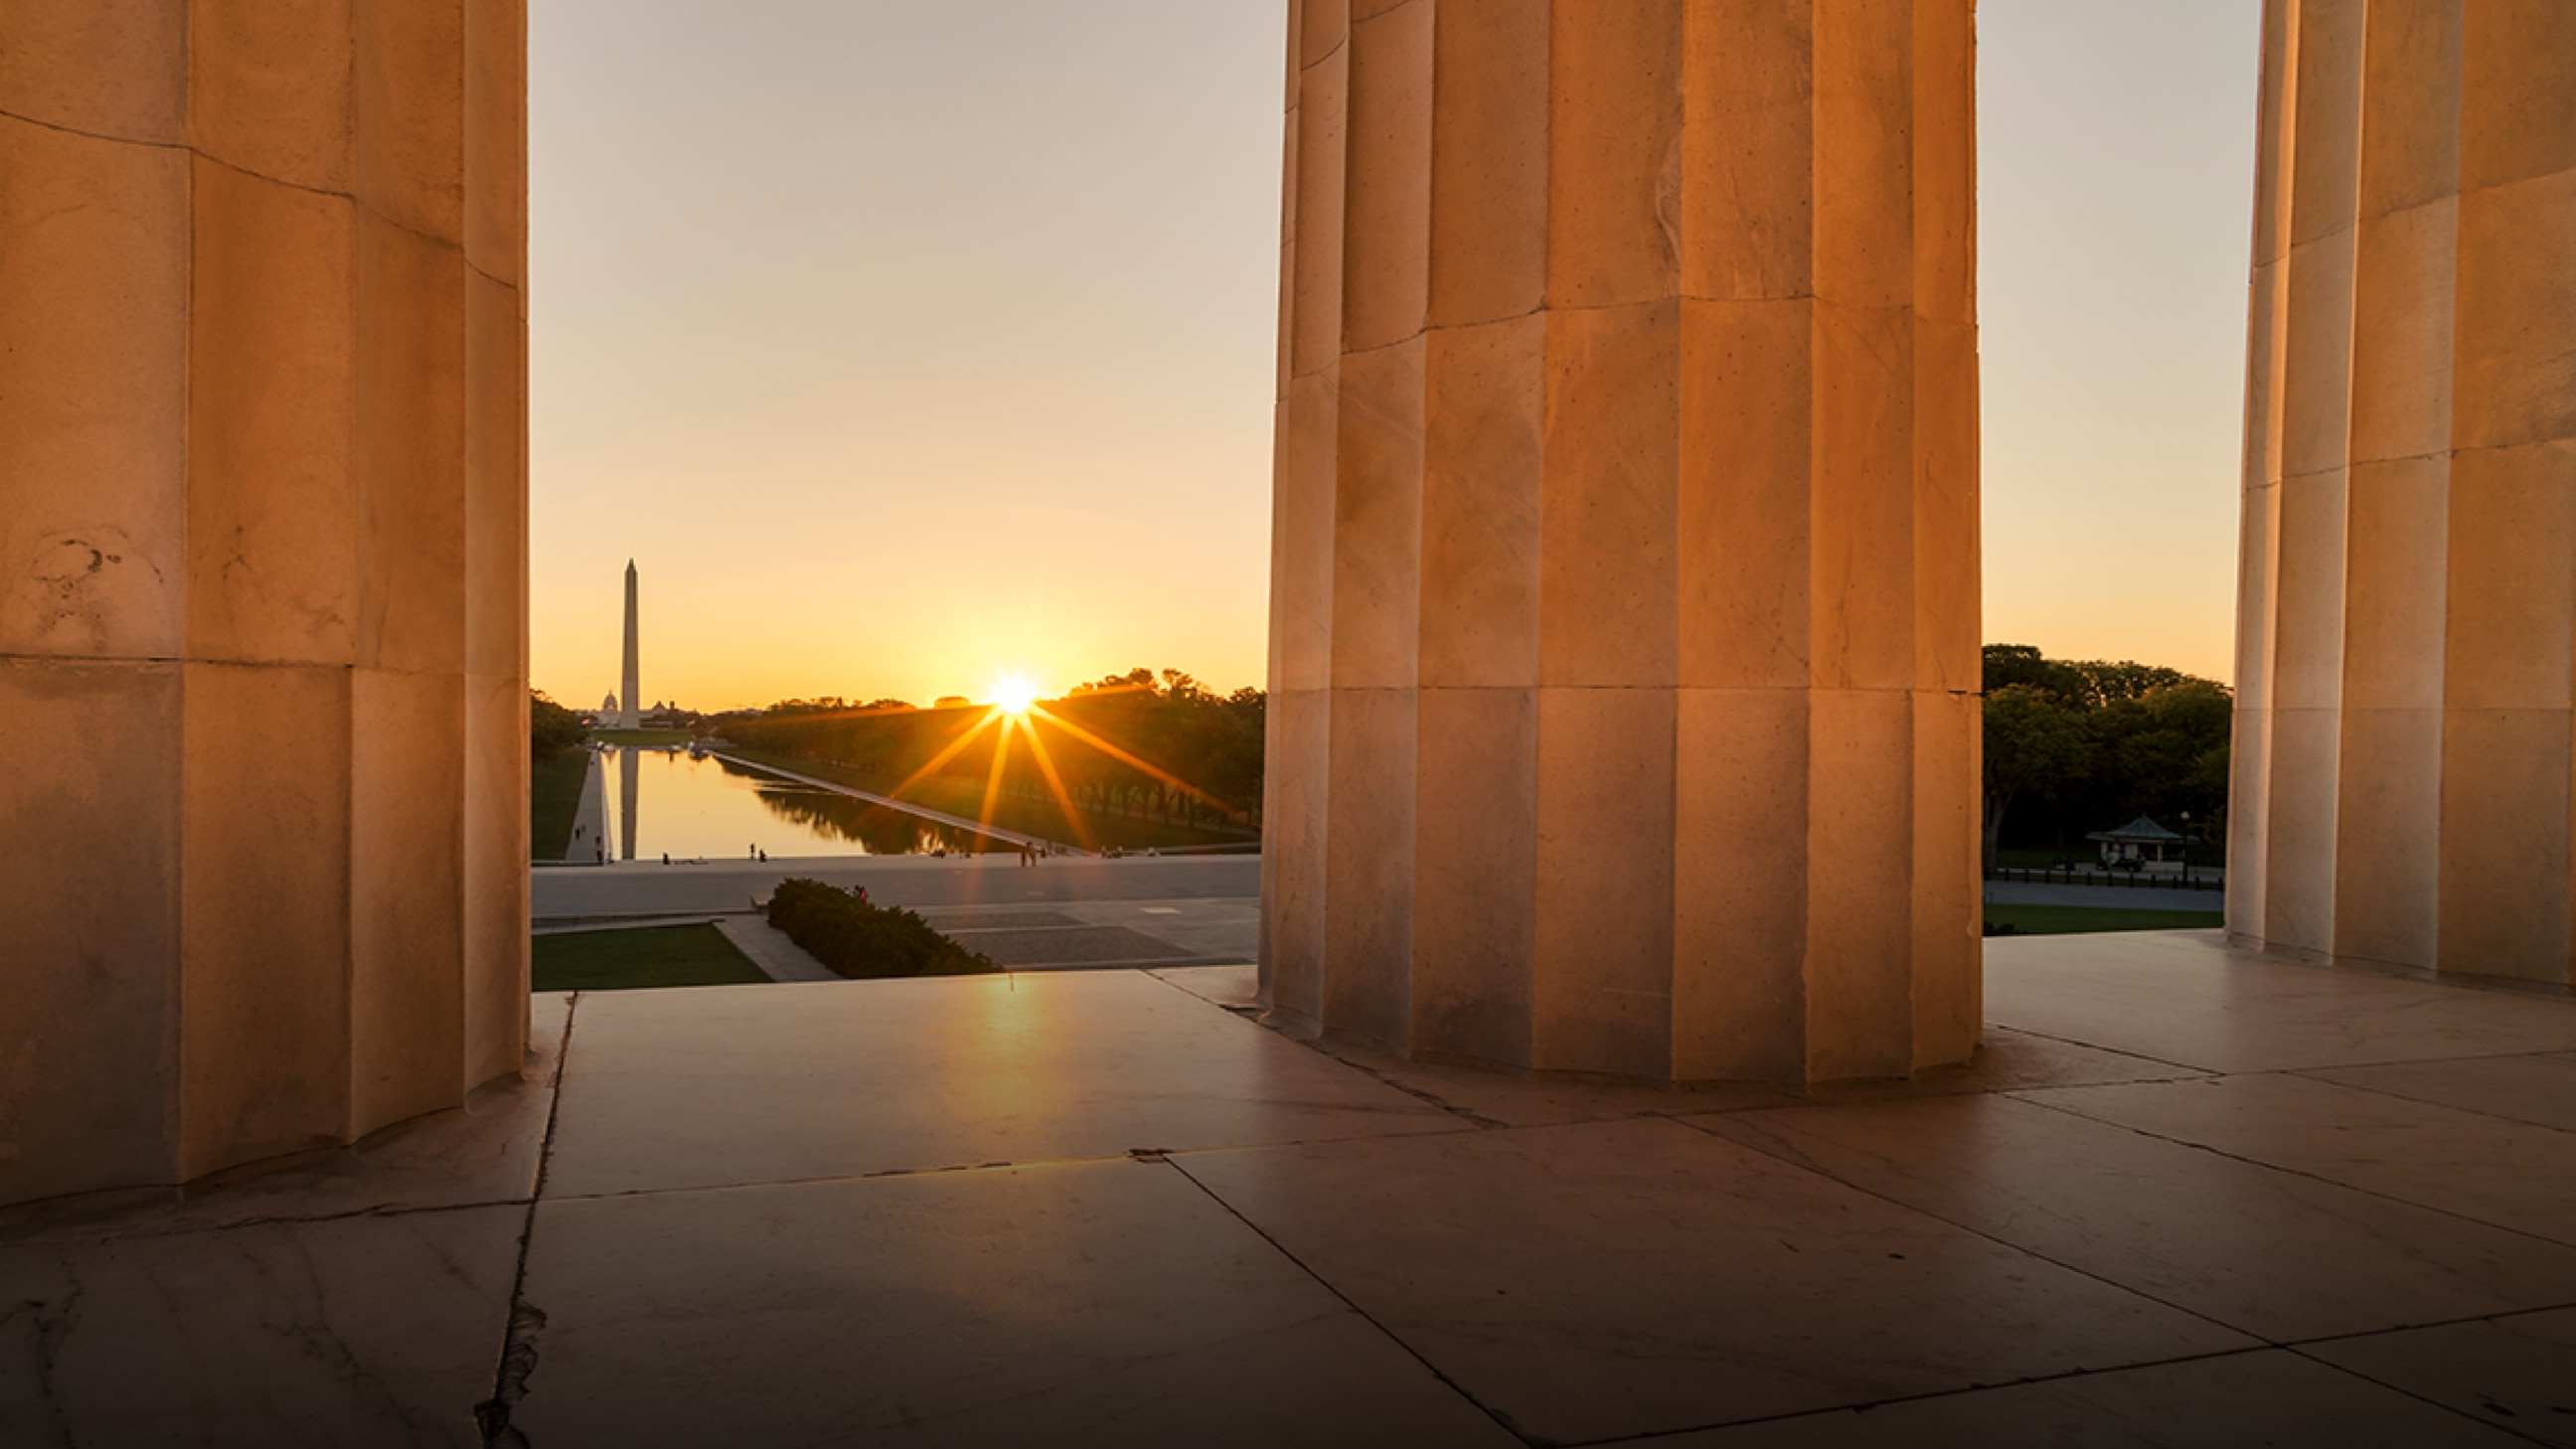 A vista of sun, calm water, and enduring monuments